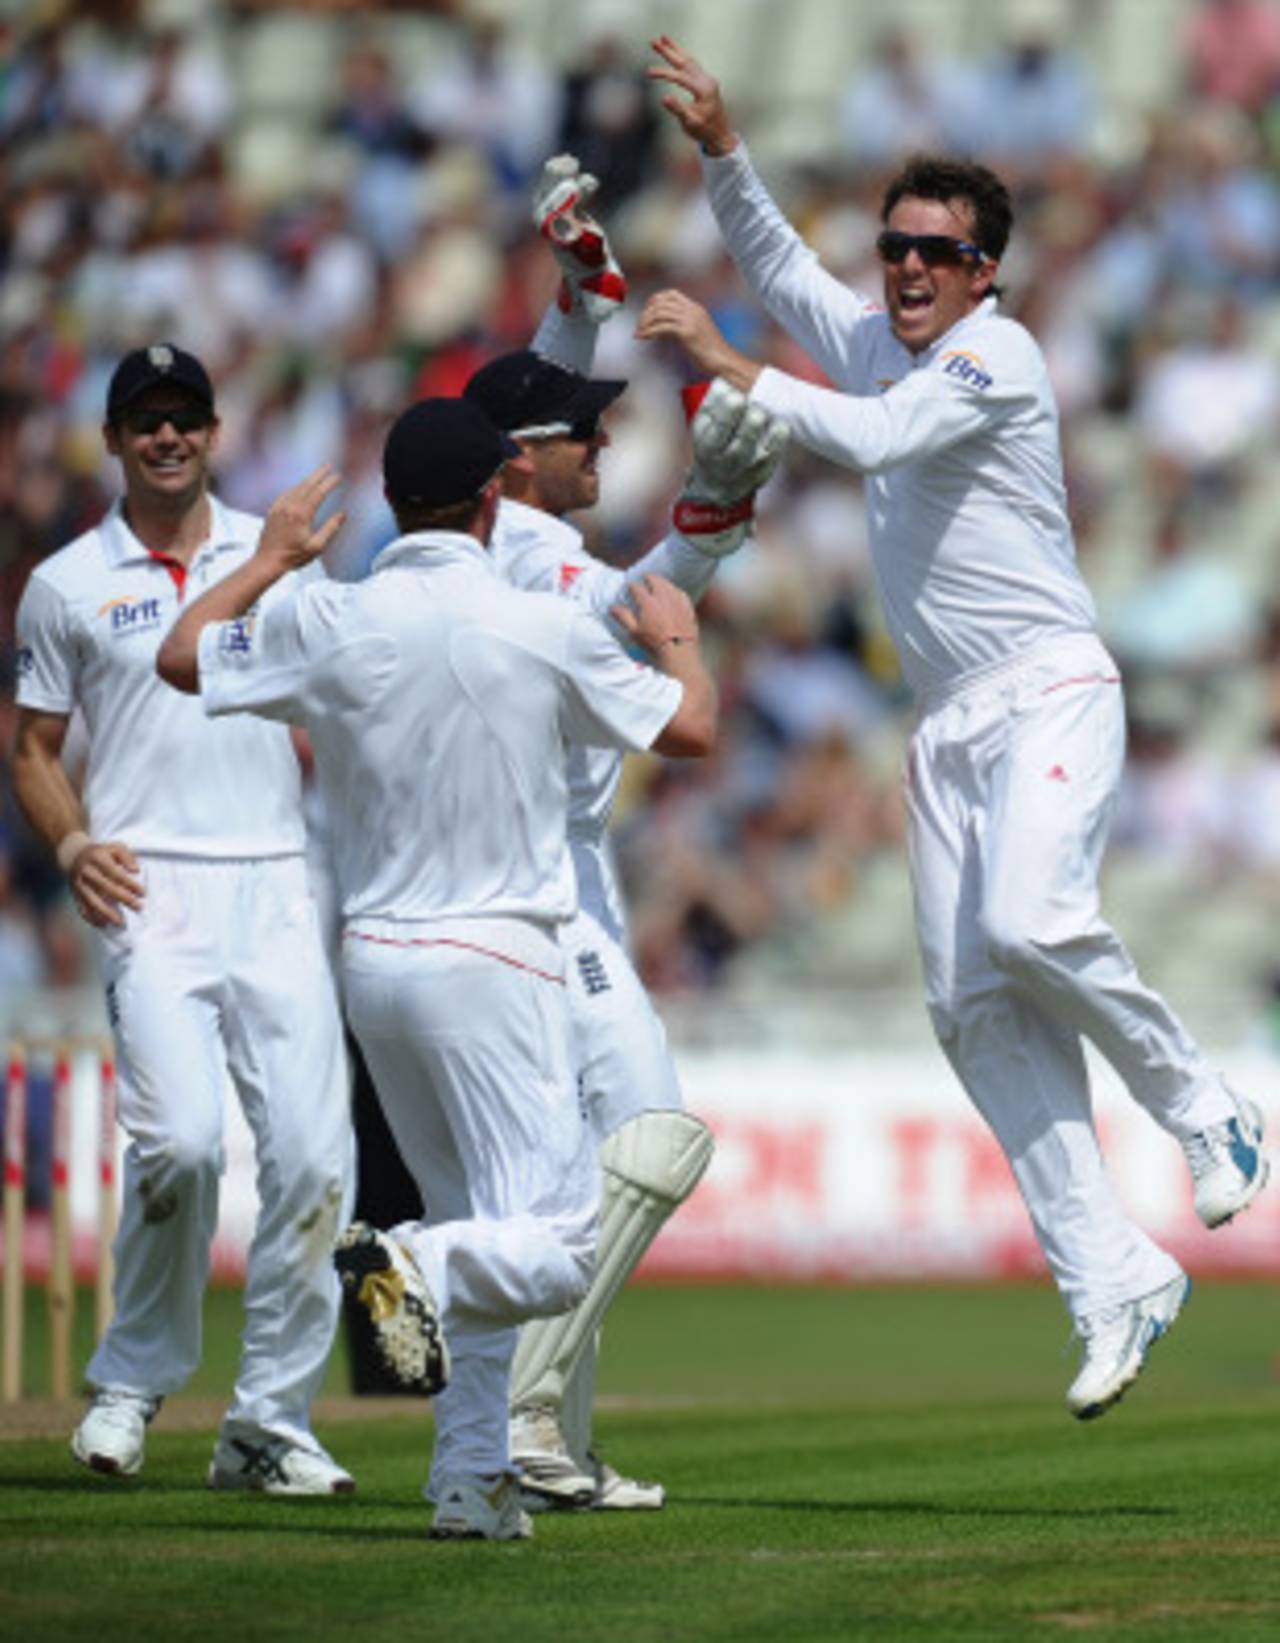 Graeme Swann was a threat when the sun came out, but he could only bowl from one end&nbsp;&nbsp;&bull;&nbsp;&nbsp;Getty Images